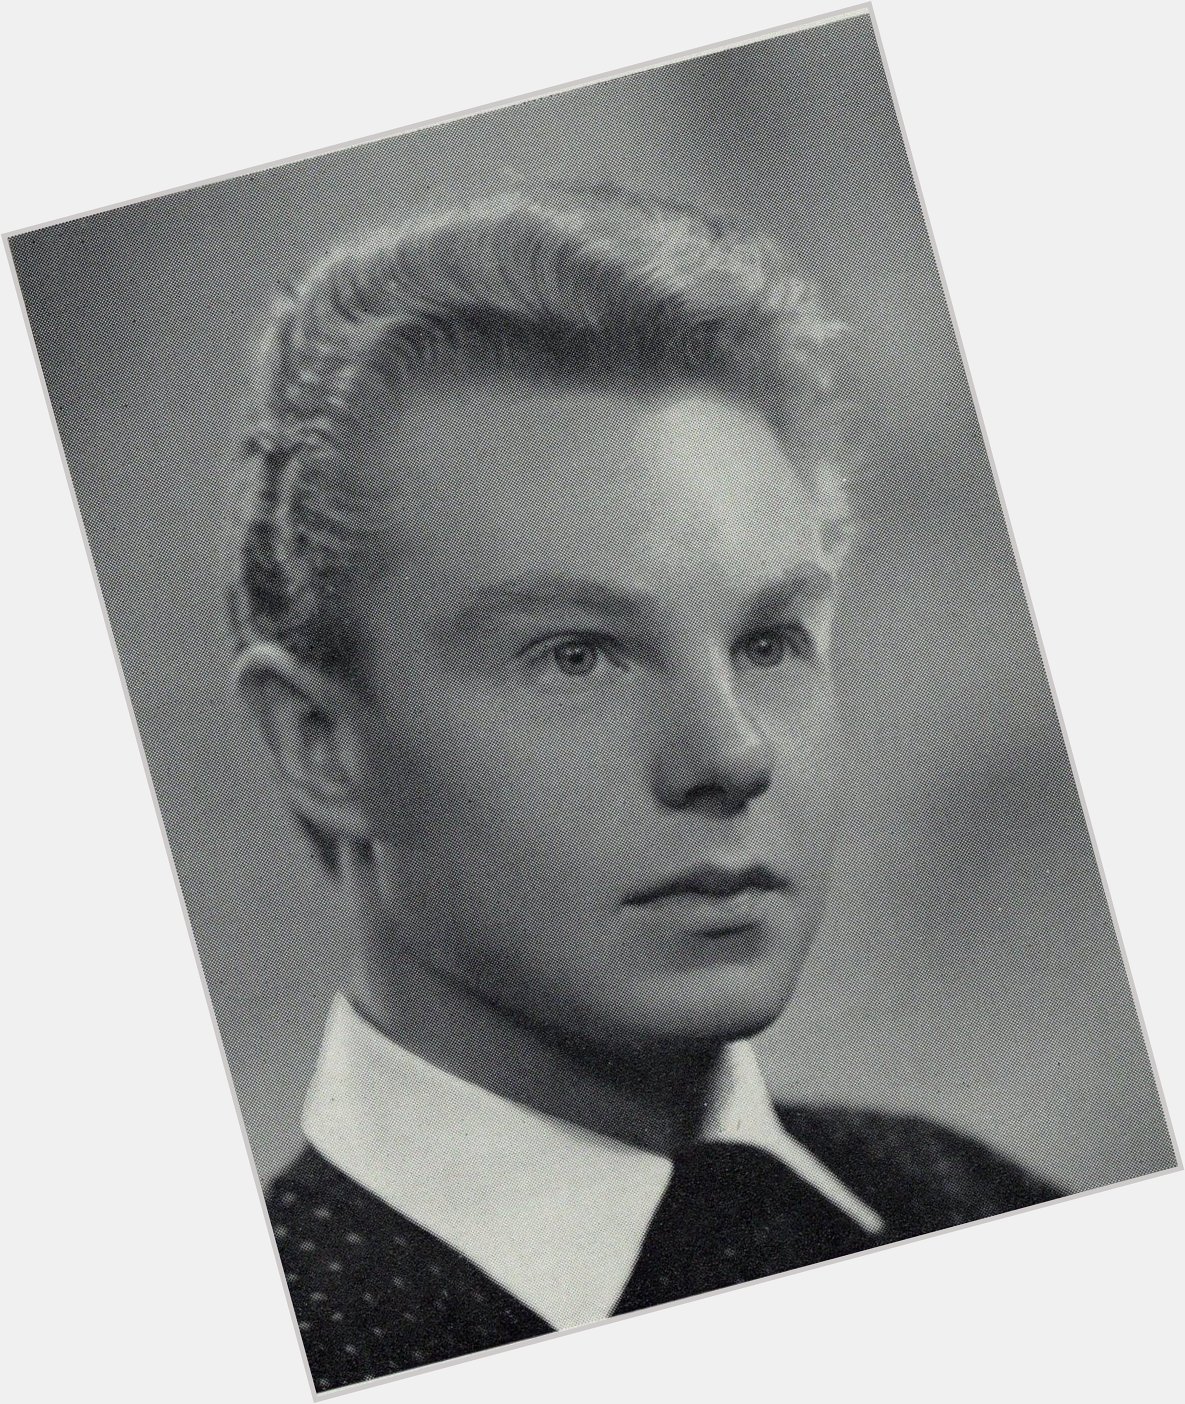 Happy birthday to our former artist director Derek Jacobi who 1st came to us as this fresh faced youth in 63 